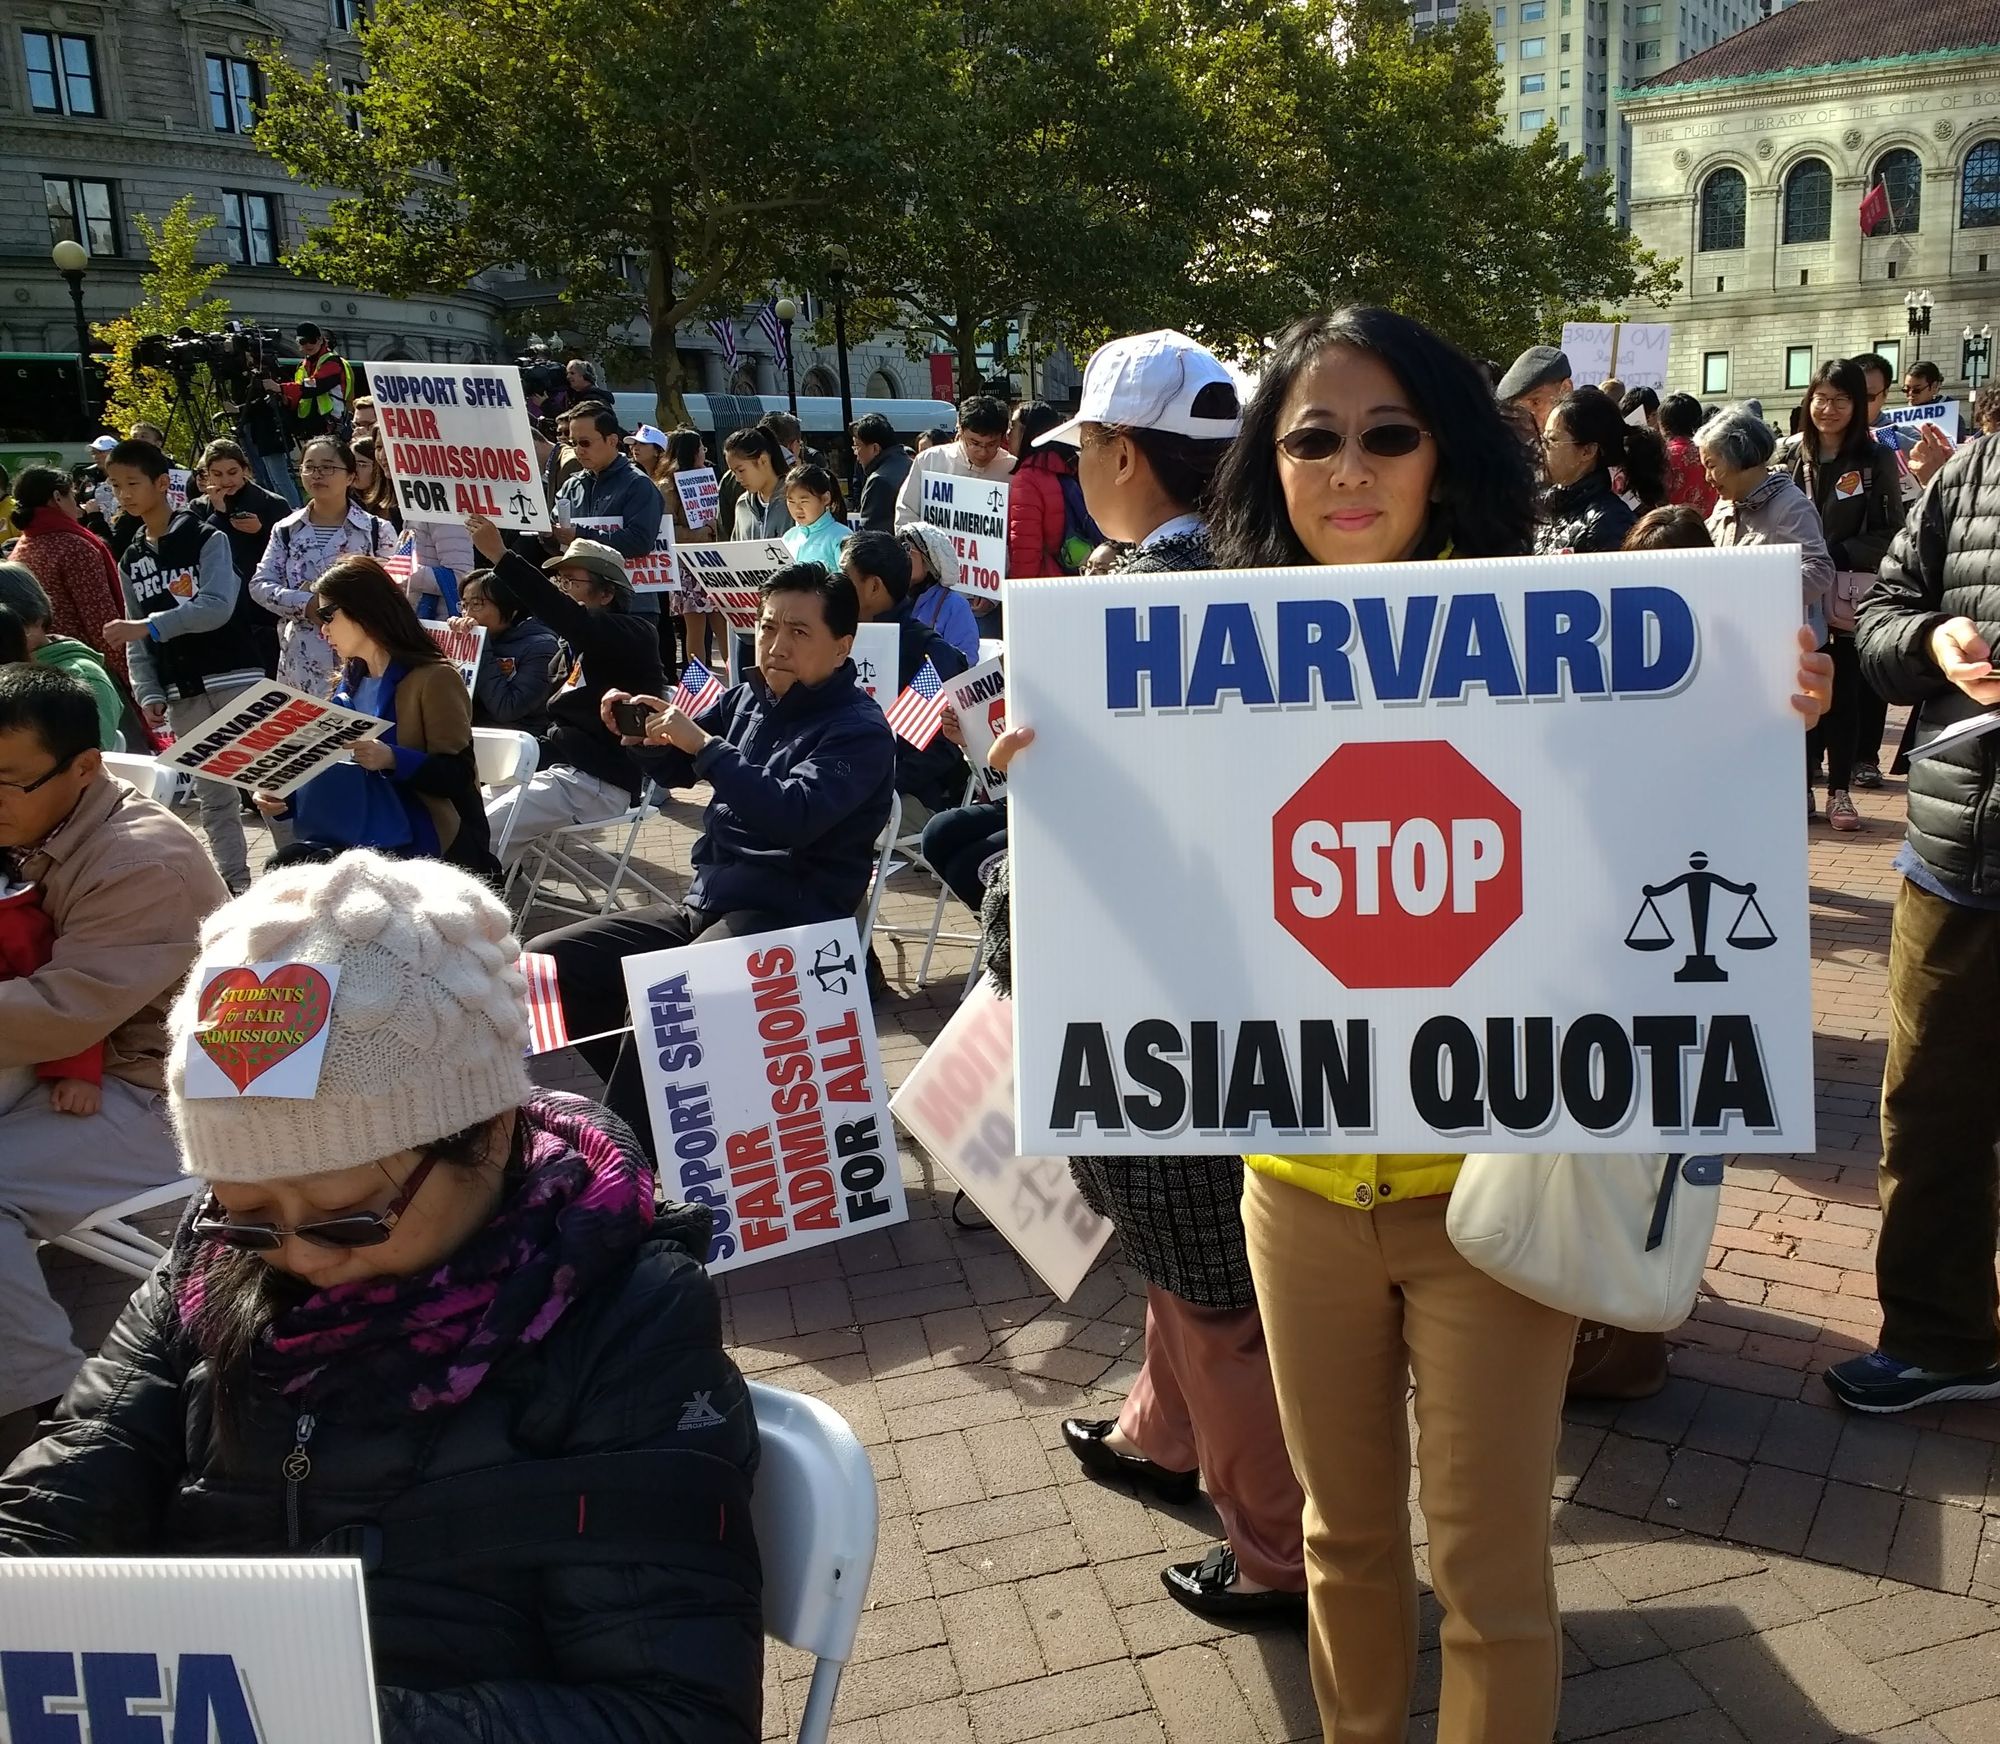 A protest in Boston's Copley Square on October 14, 2018 to support the lawsuit from Students for Fair Admissions against Harvard. Photo: Whosijohngalt / WikiCommons